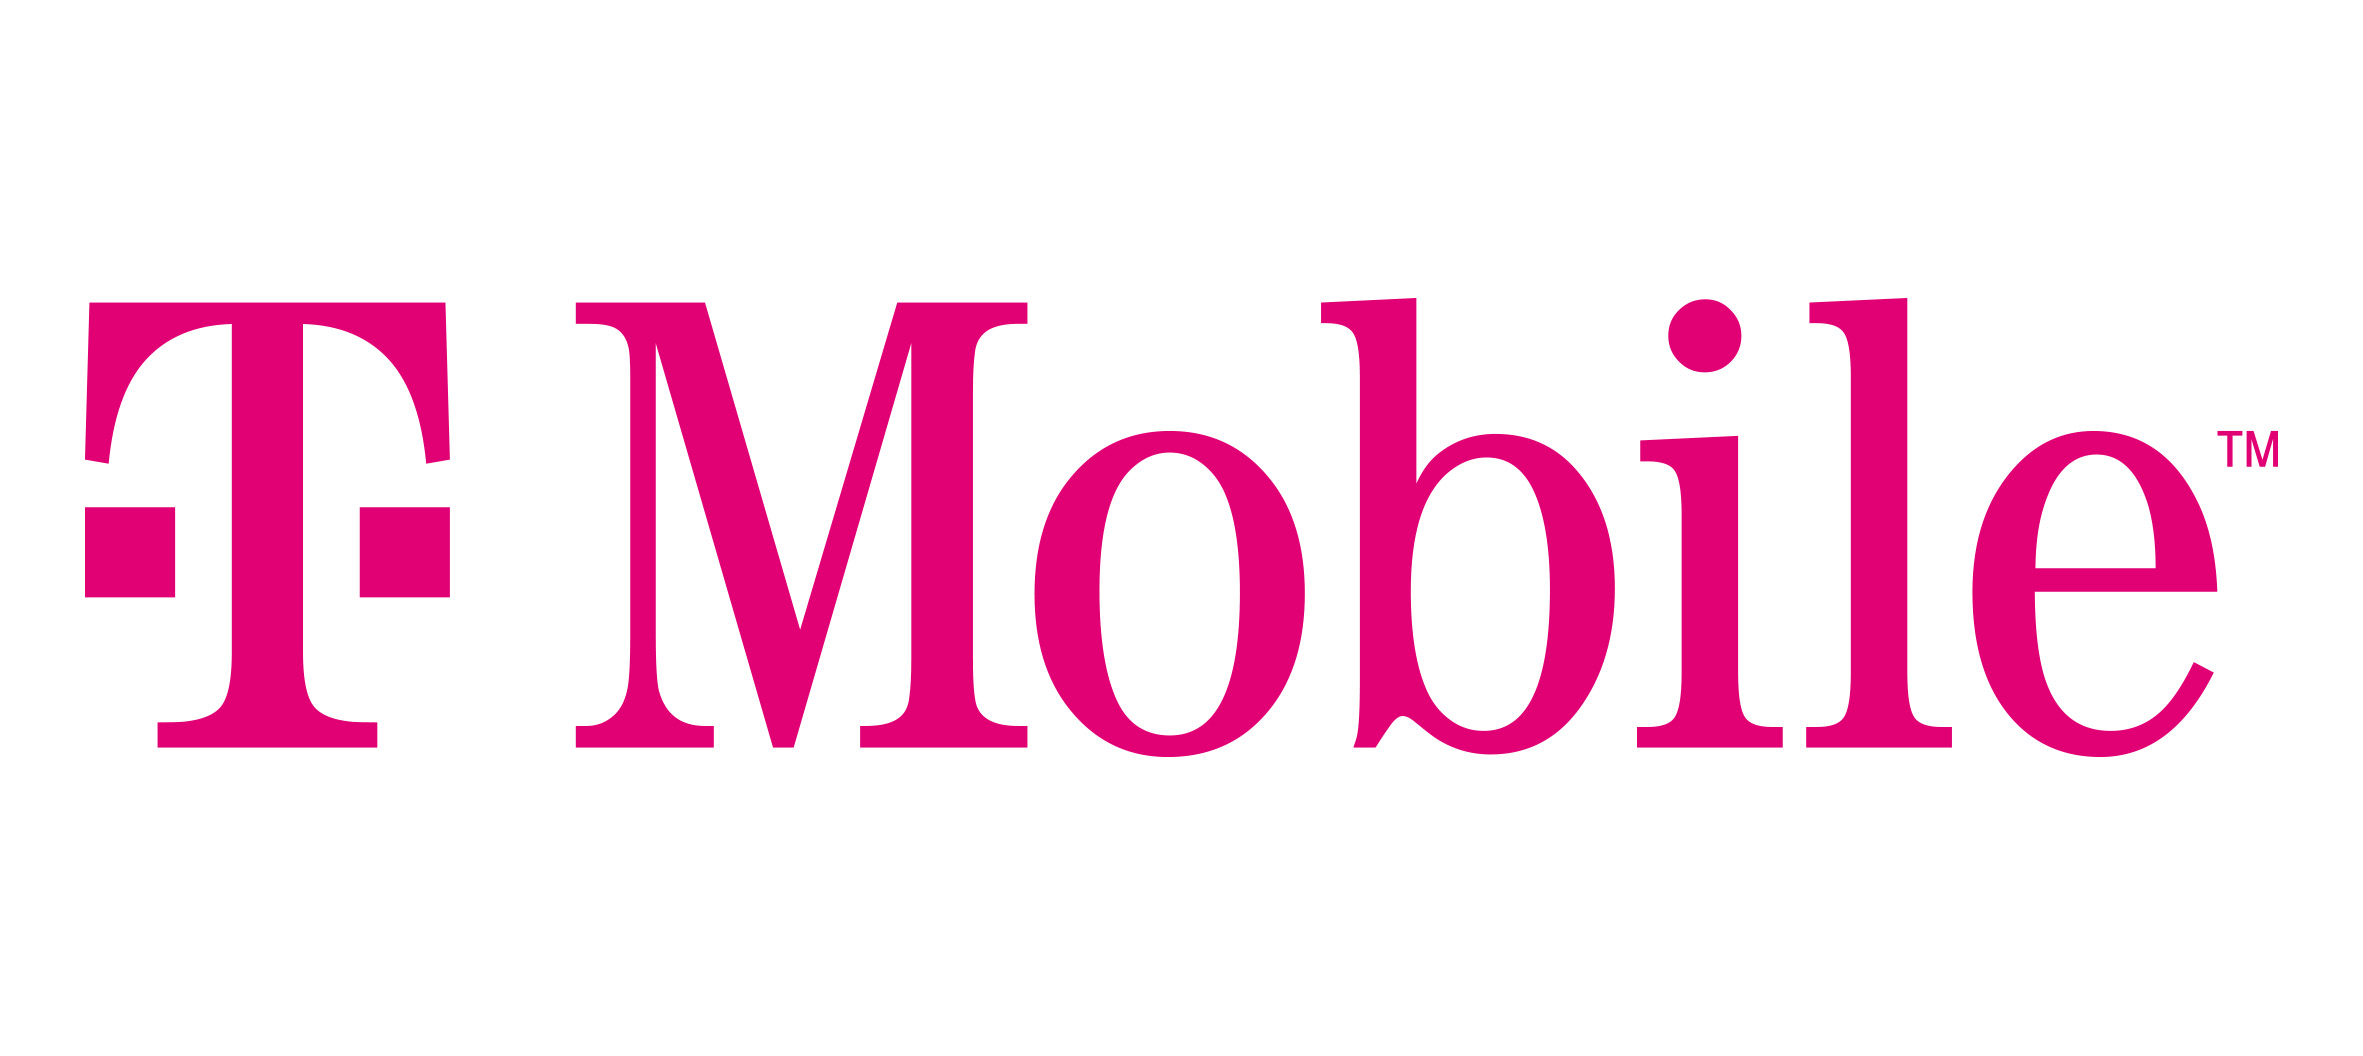 Get Costco $300 Shop Card with TMobile BYOD (up to 2 = $600) expires 9/23